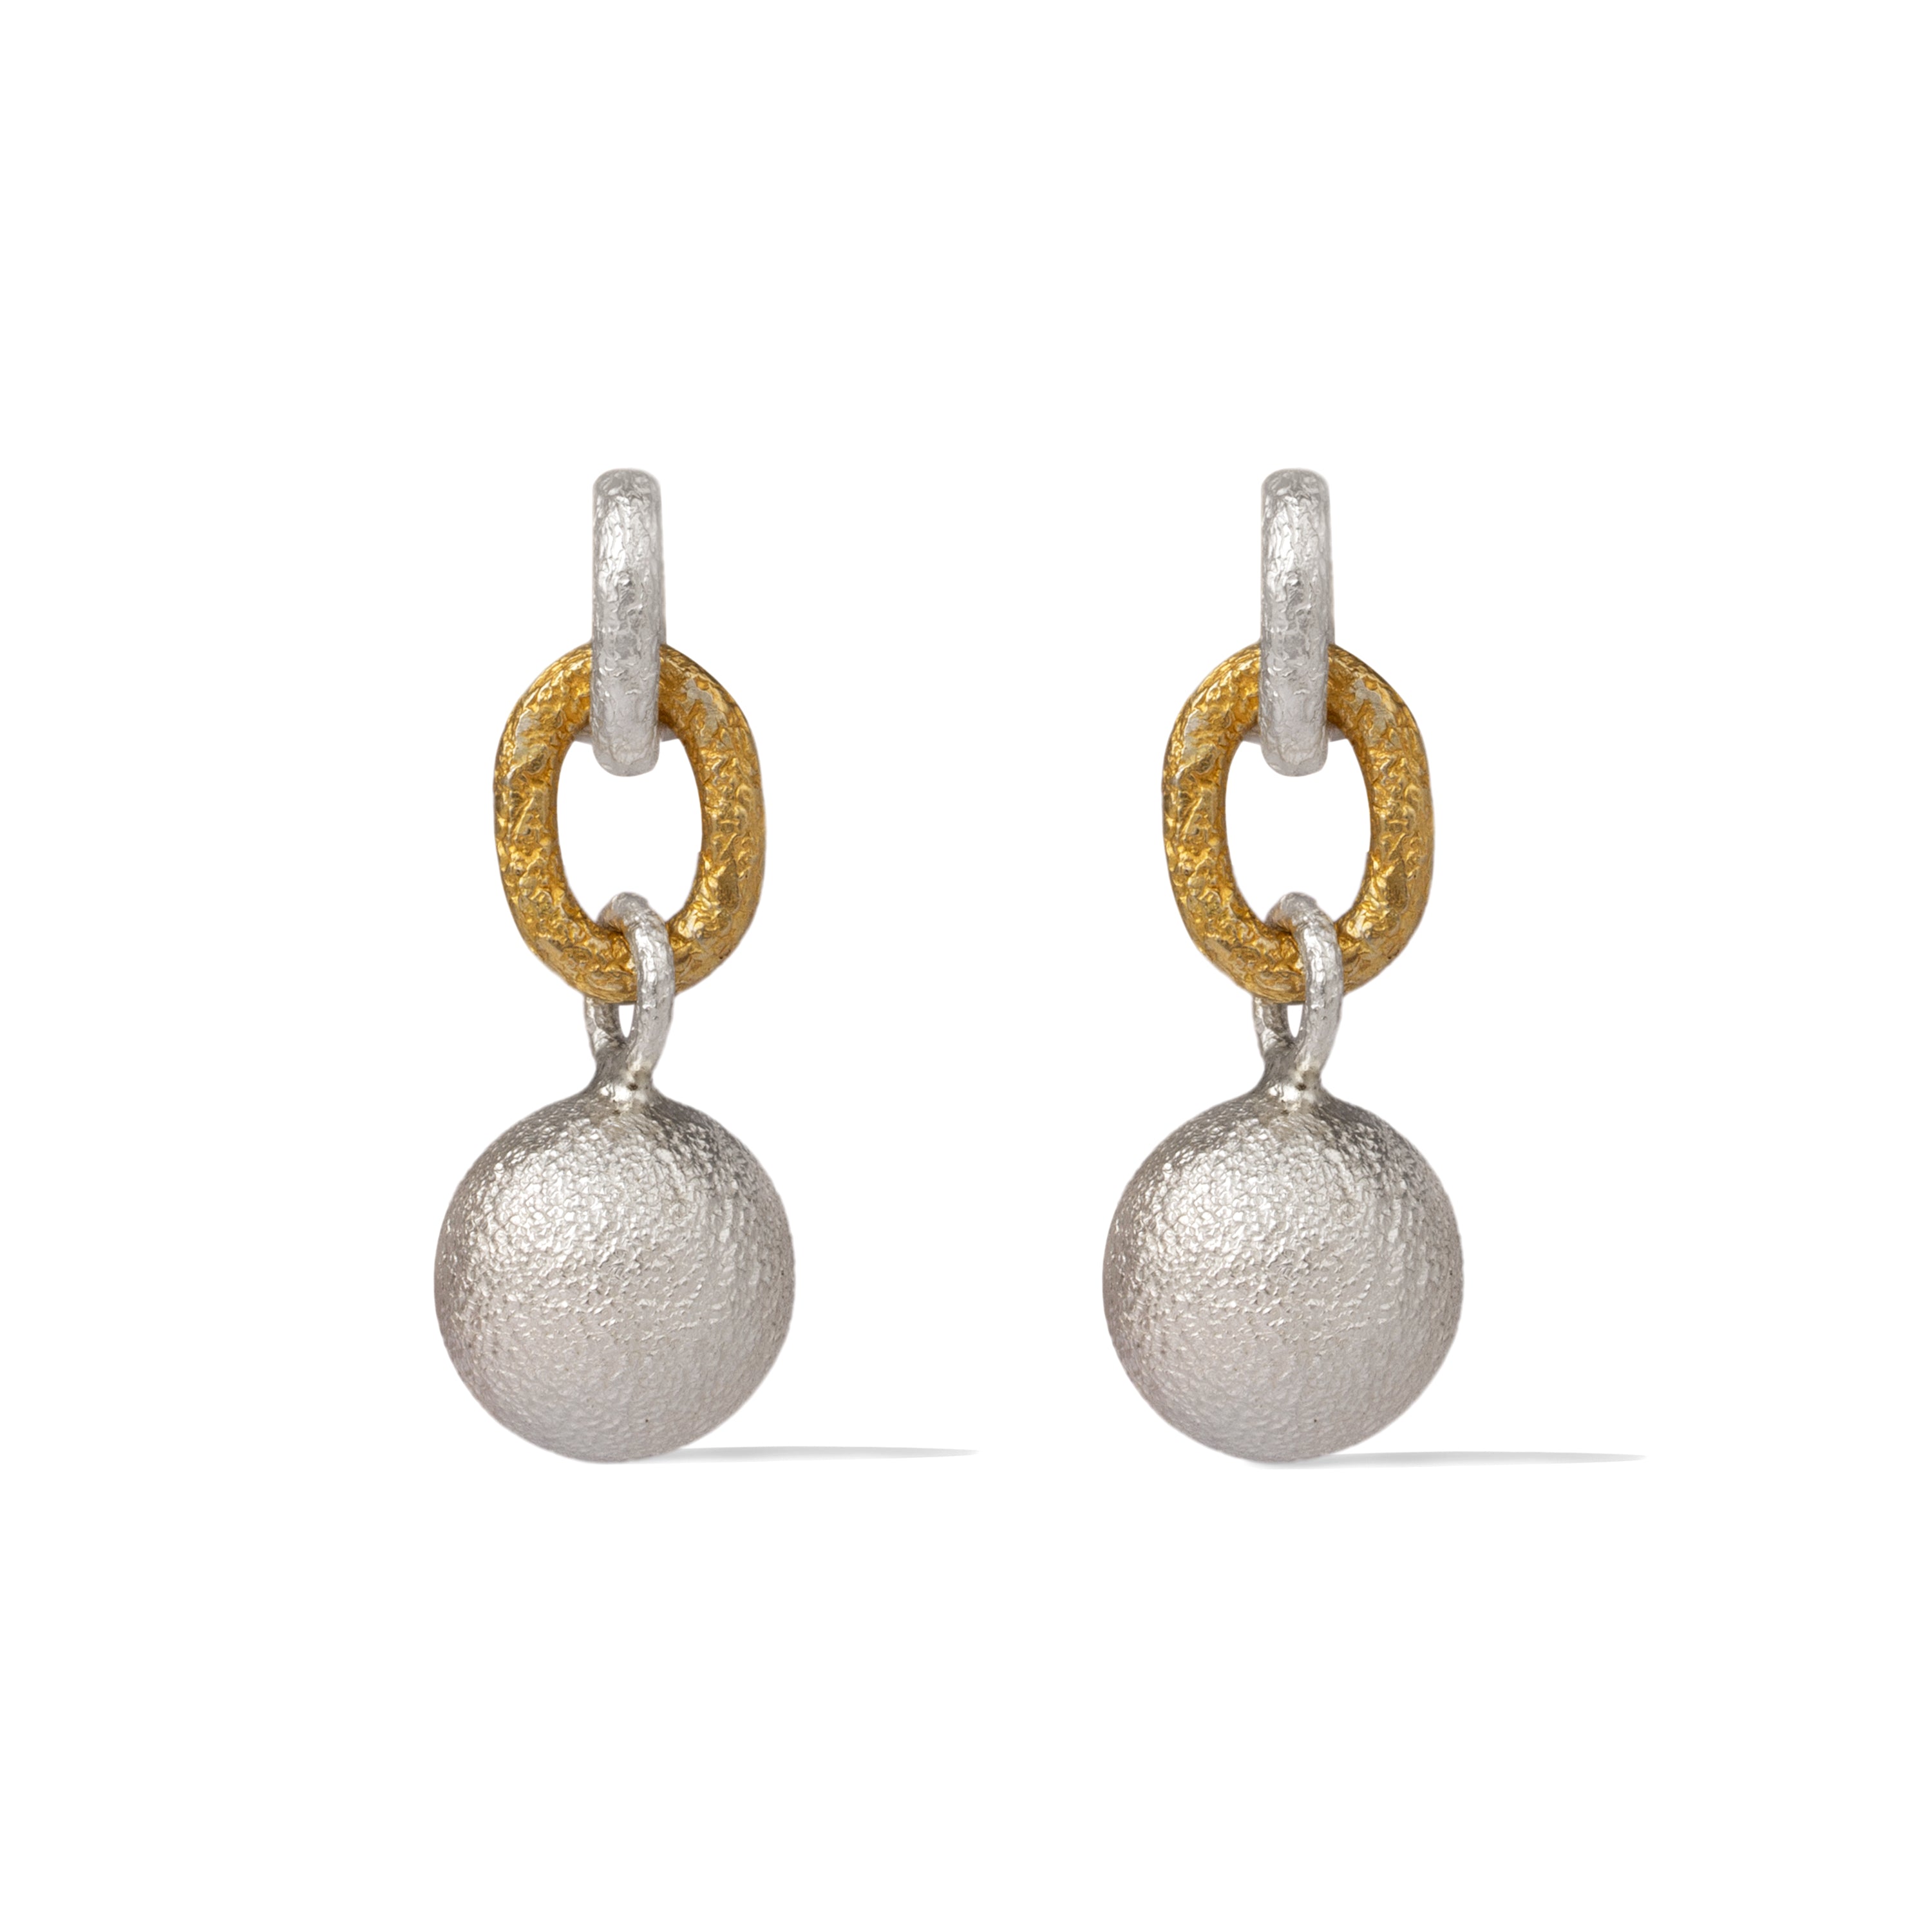 Hanging silver Ball Earring.